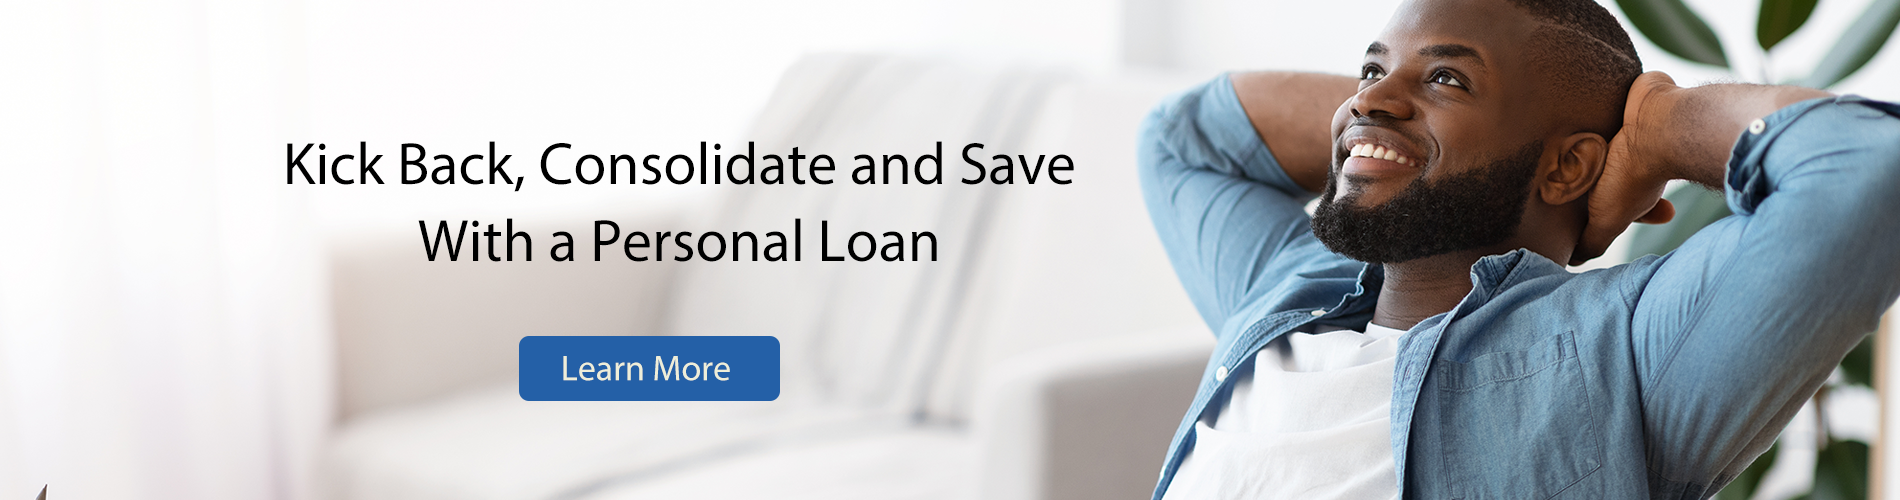 Kick Back, Consolidate and Save with a personal loan.  Learn more.